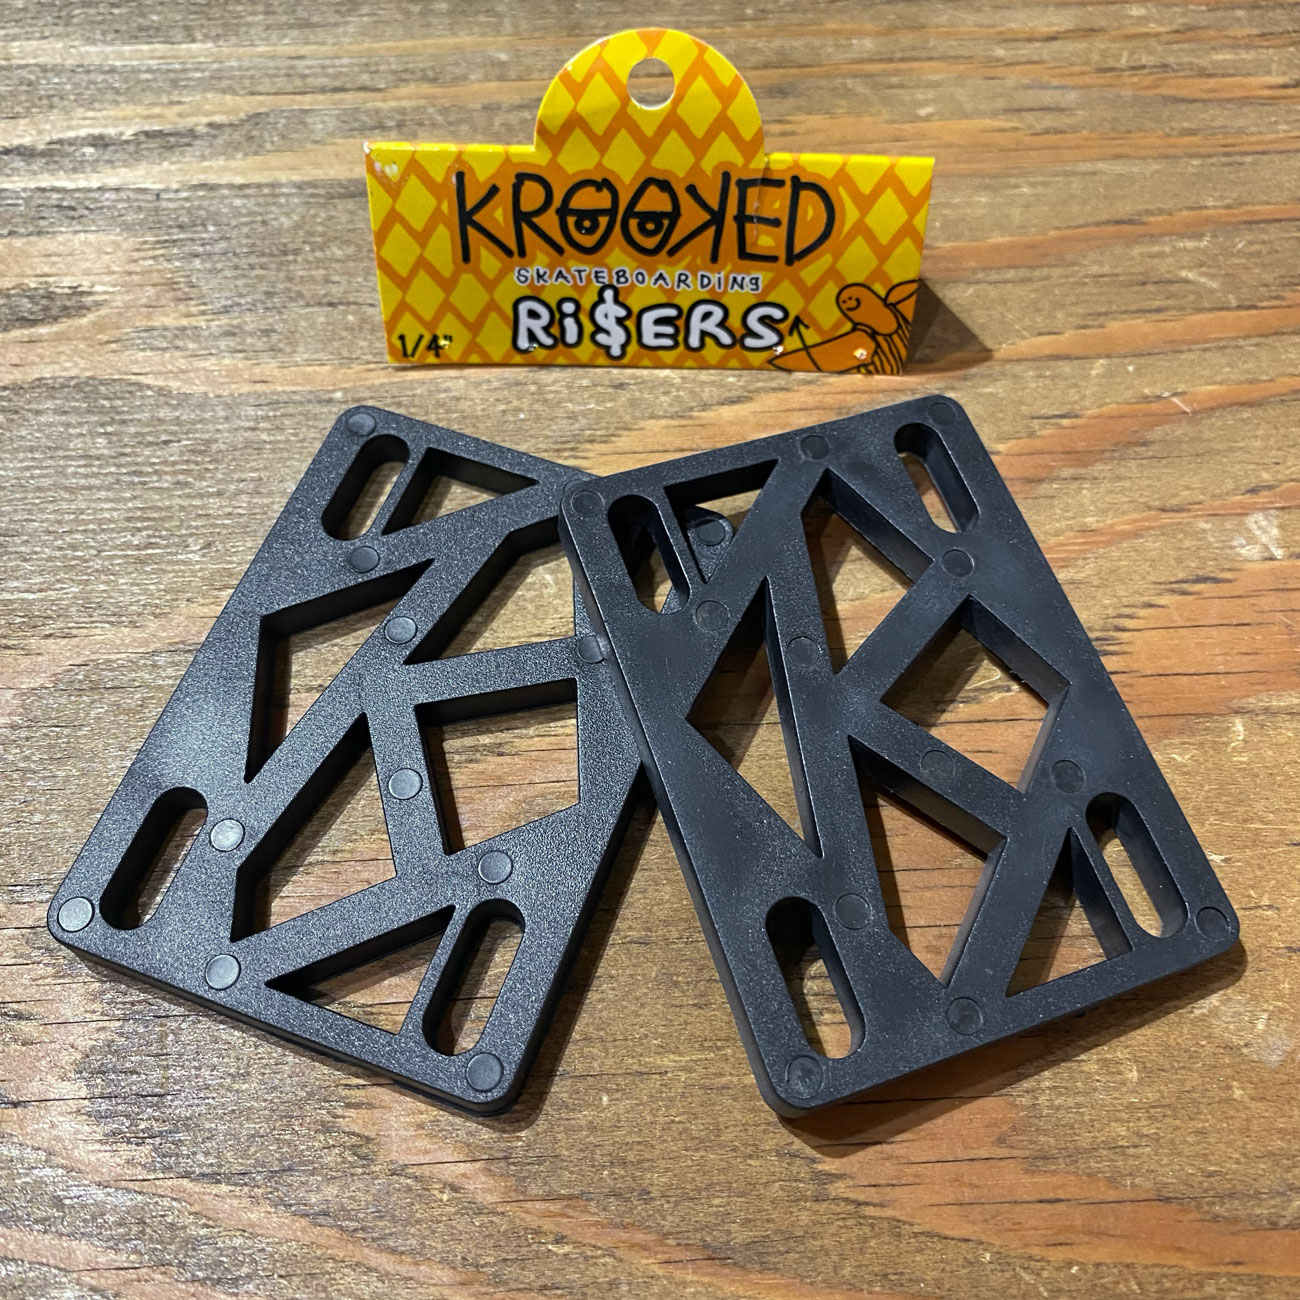 KROOKED RISERS 1/4inch